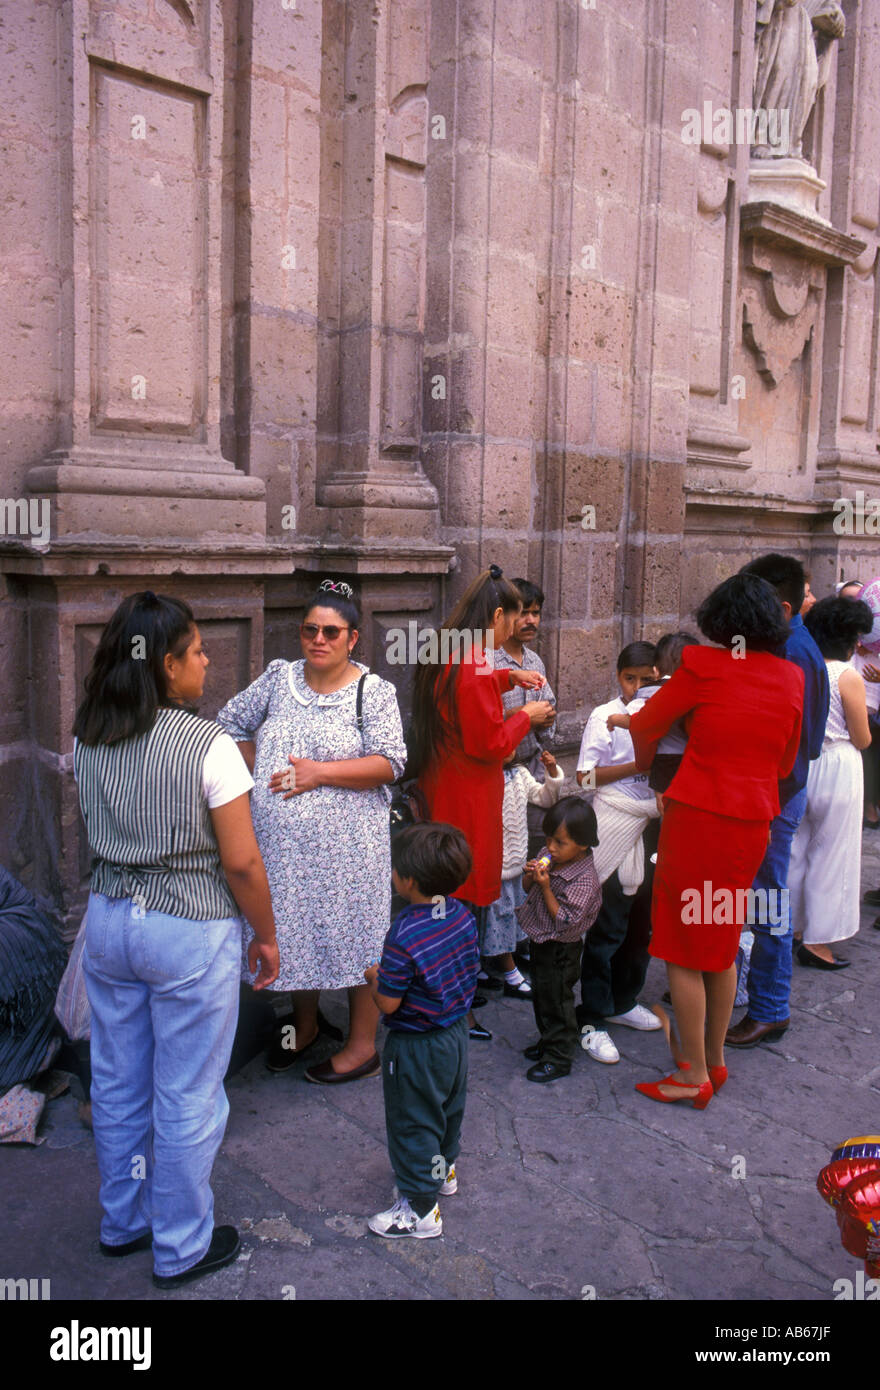 Mexicans, Mexican people, women, girls, waiting in line for baptism, Cathedral, Morelia, Michoacan State, Mexico Stock Photo